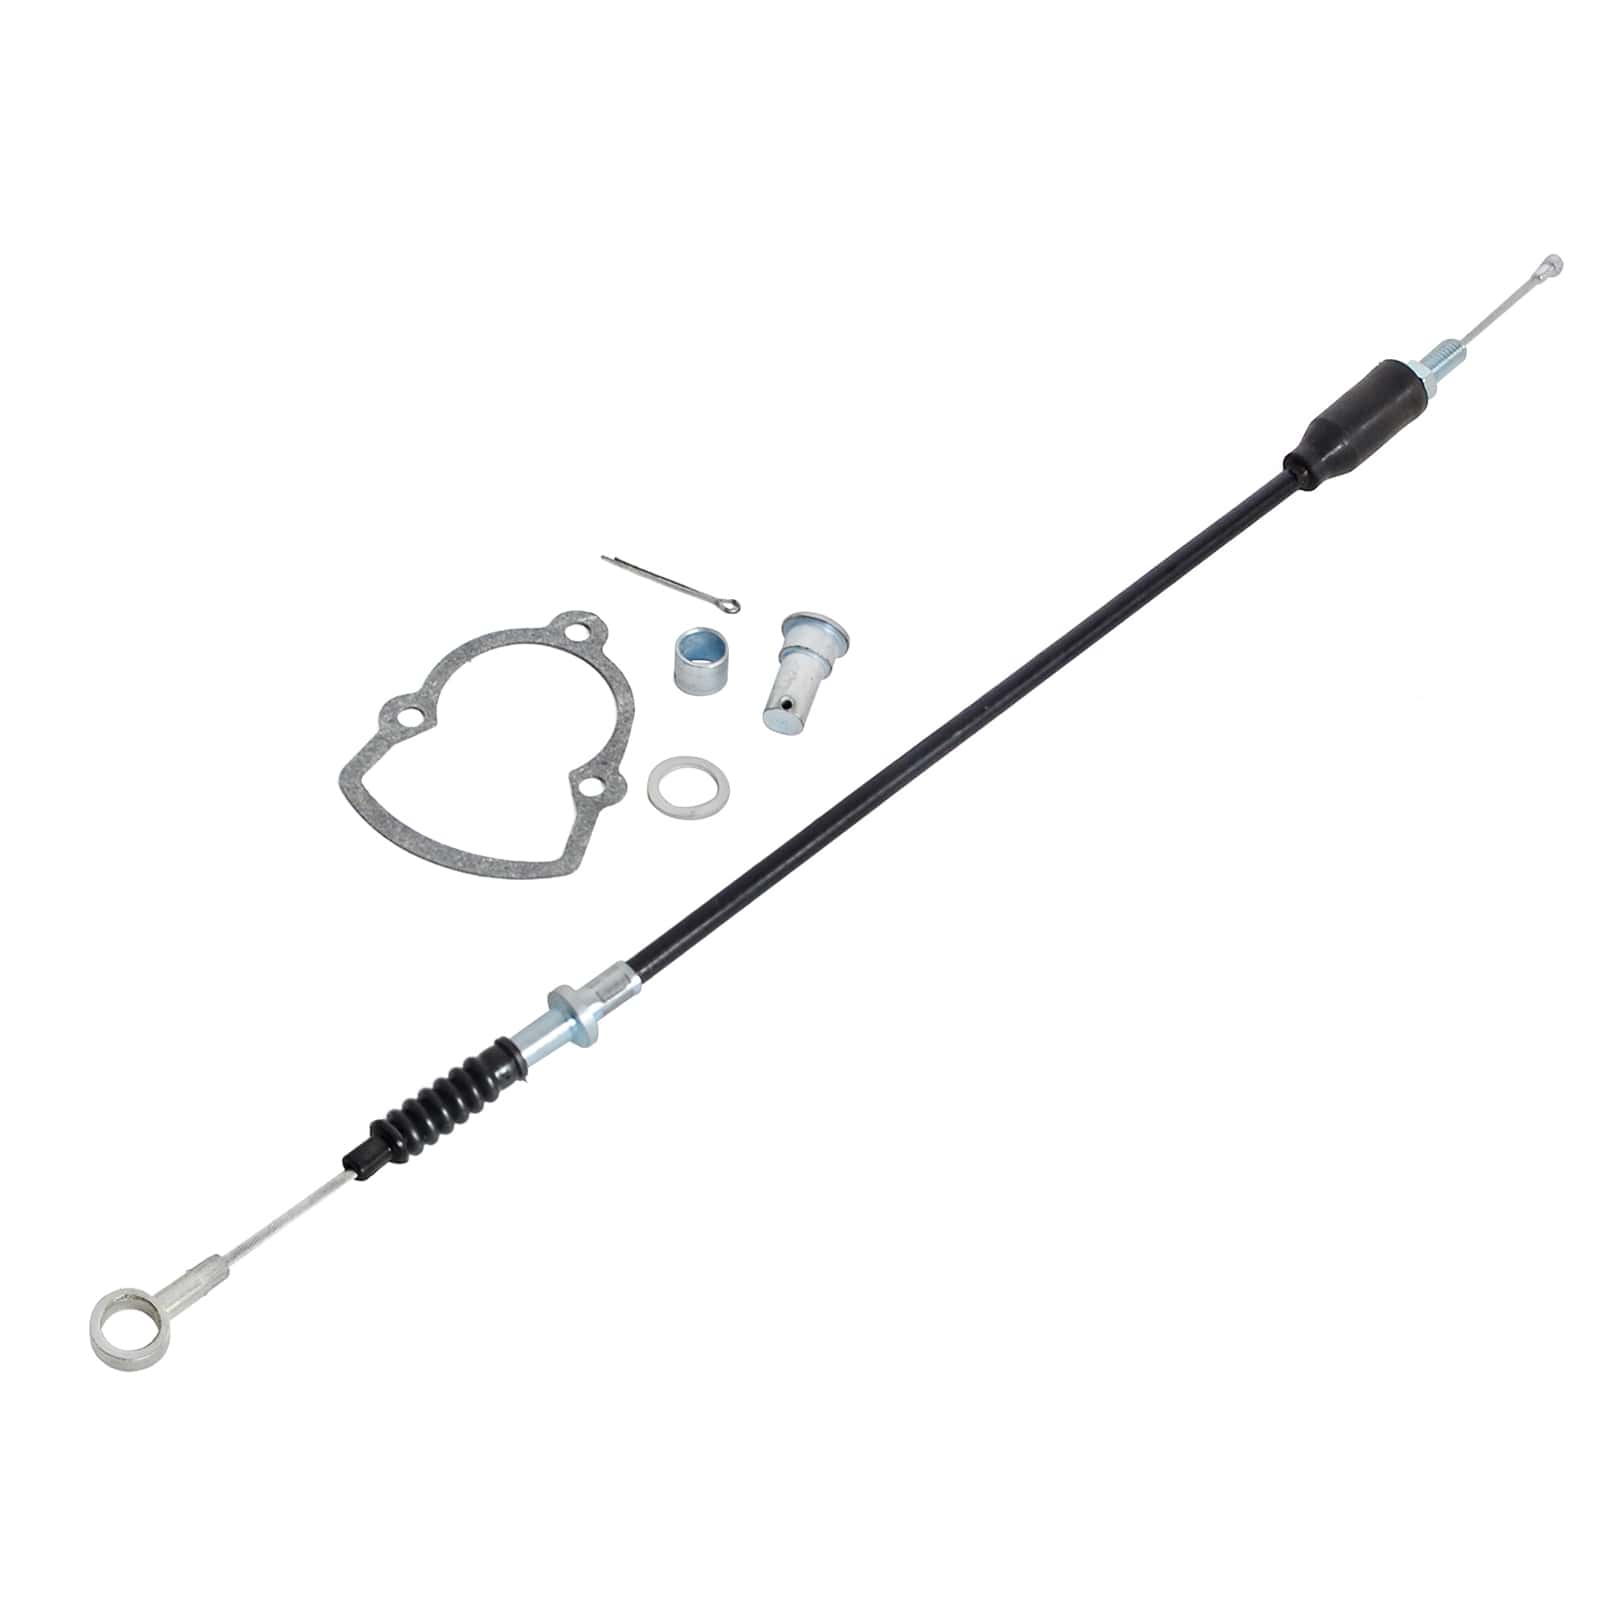 Rear Foot Brake Cable For Yamaha Blaster 200 YFS200